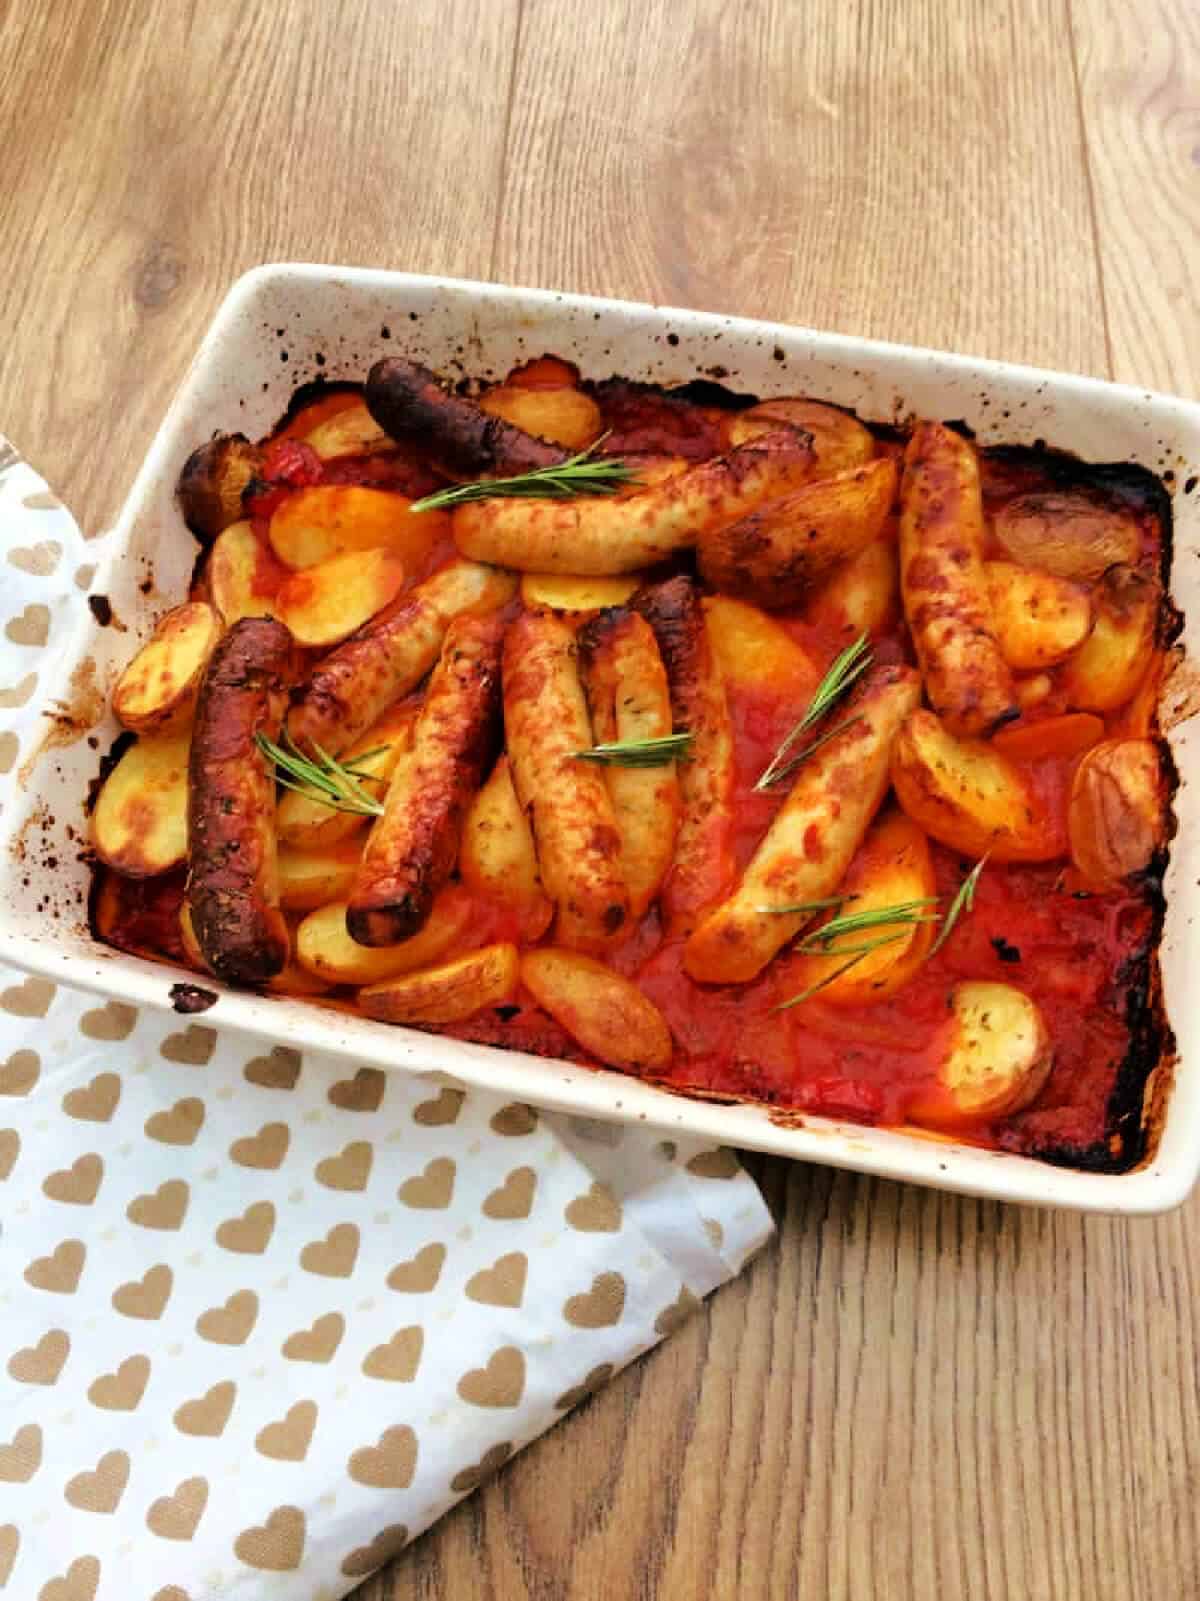 Chicken sausage and potato bake in a white serving dish.